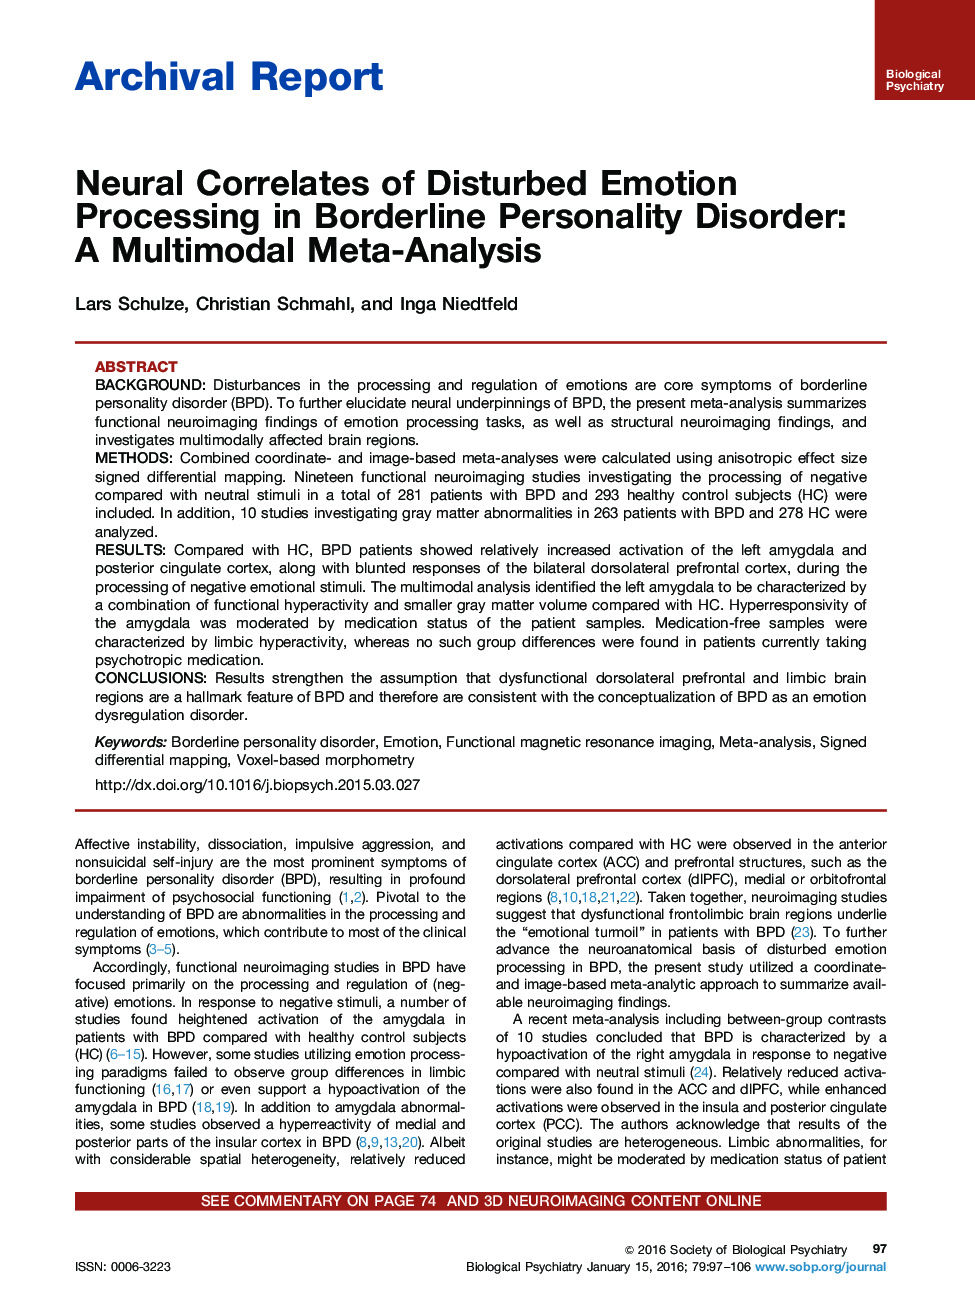 Neural Correlates of Disturbed Emotion Processing in Borderline Personality Disorder: A Multimodal Meta-Analysis